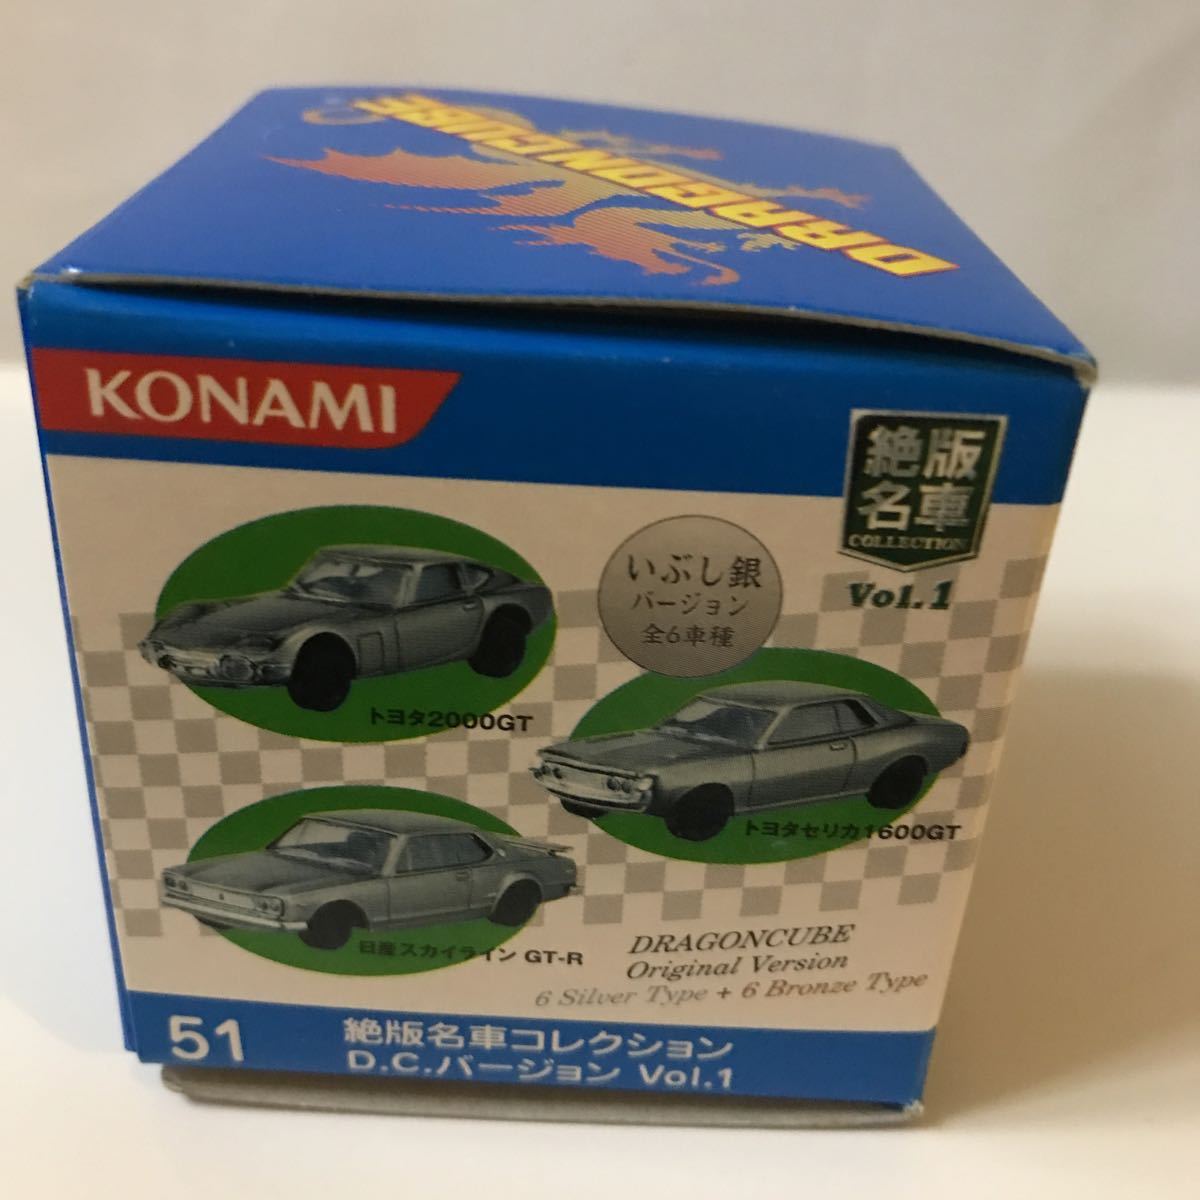  including carriage : Nissan Sunny coupe 1200GX-5... silver 1/64 Konami out of print famous car collection D.C. VERSION vol.1 Dragon Cube minicar box equipped 